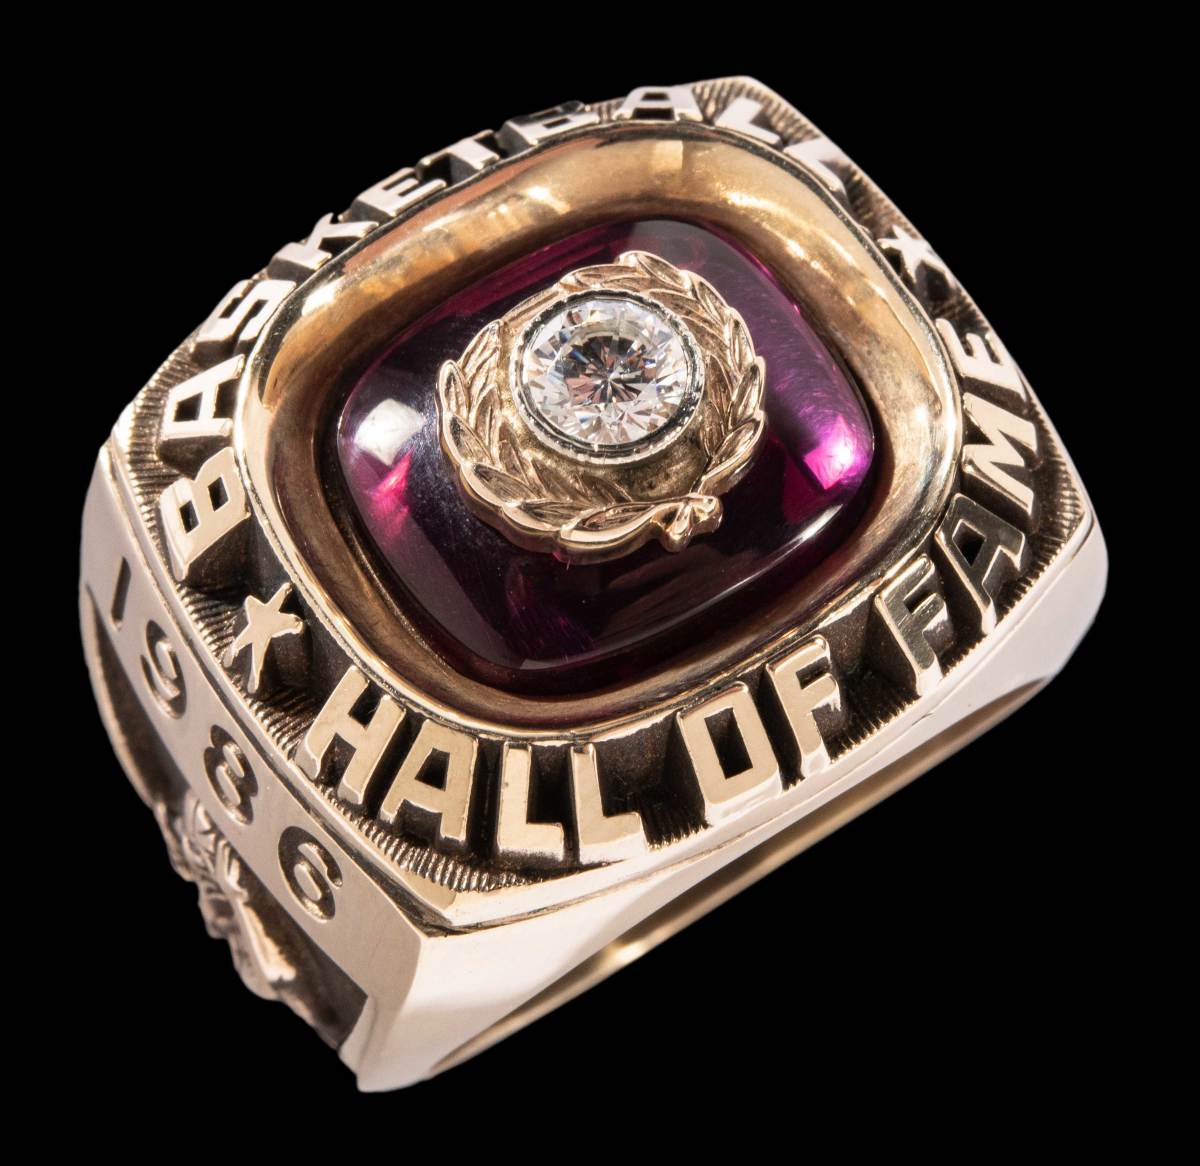 Tommy Heinsohn Basketball Hall of Fame ring.